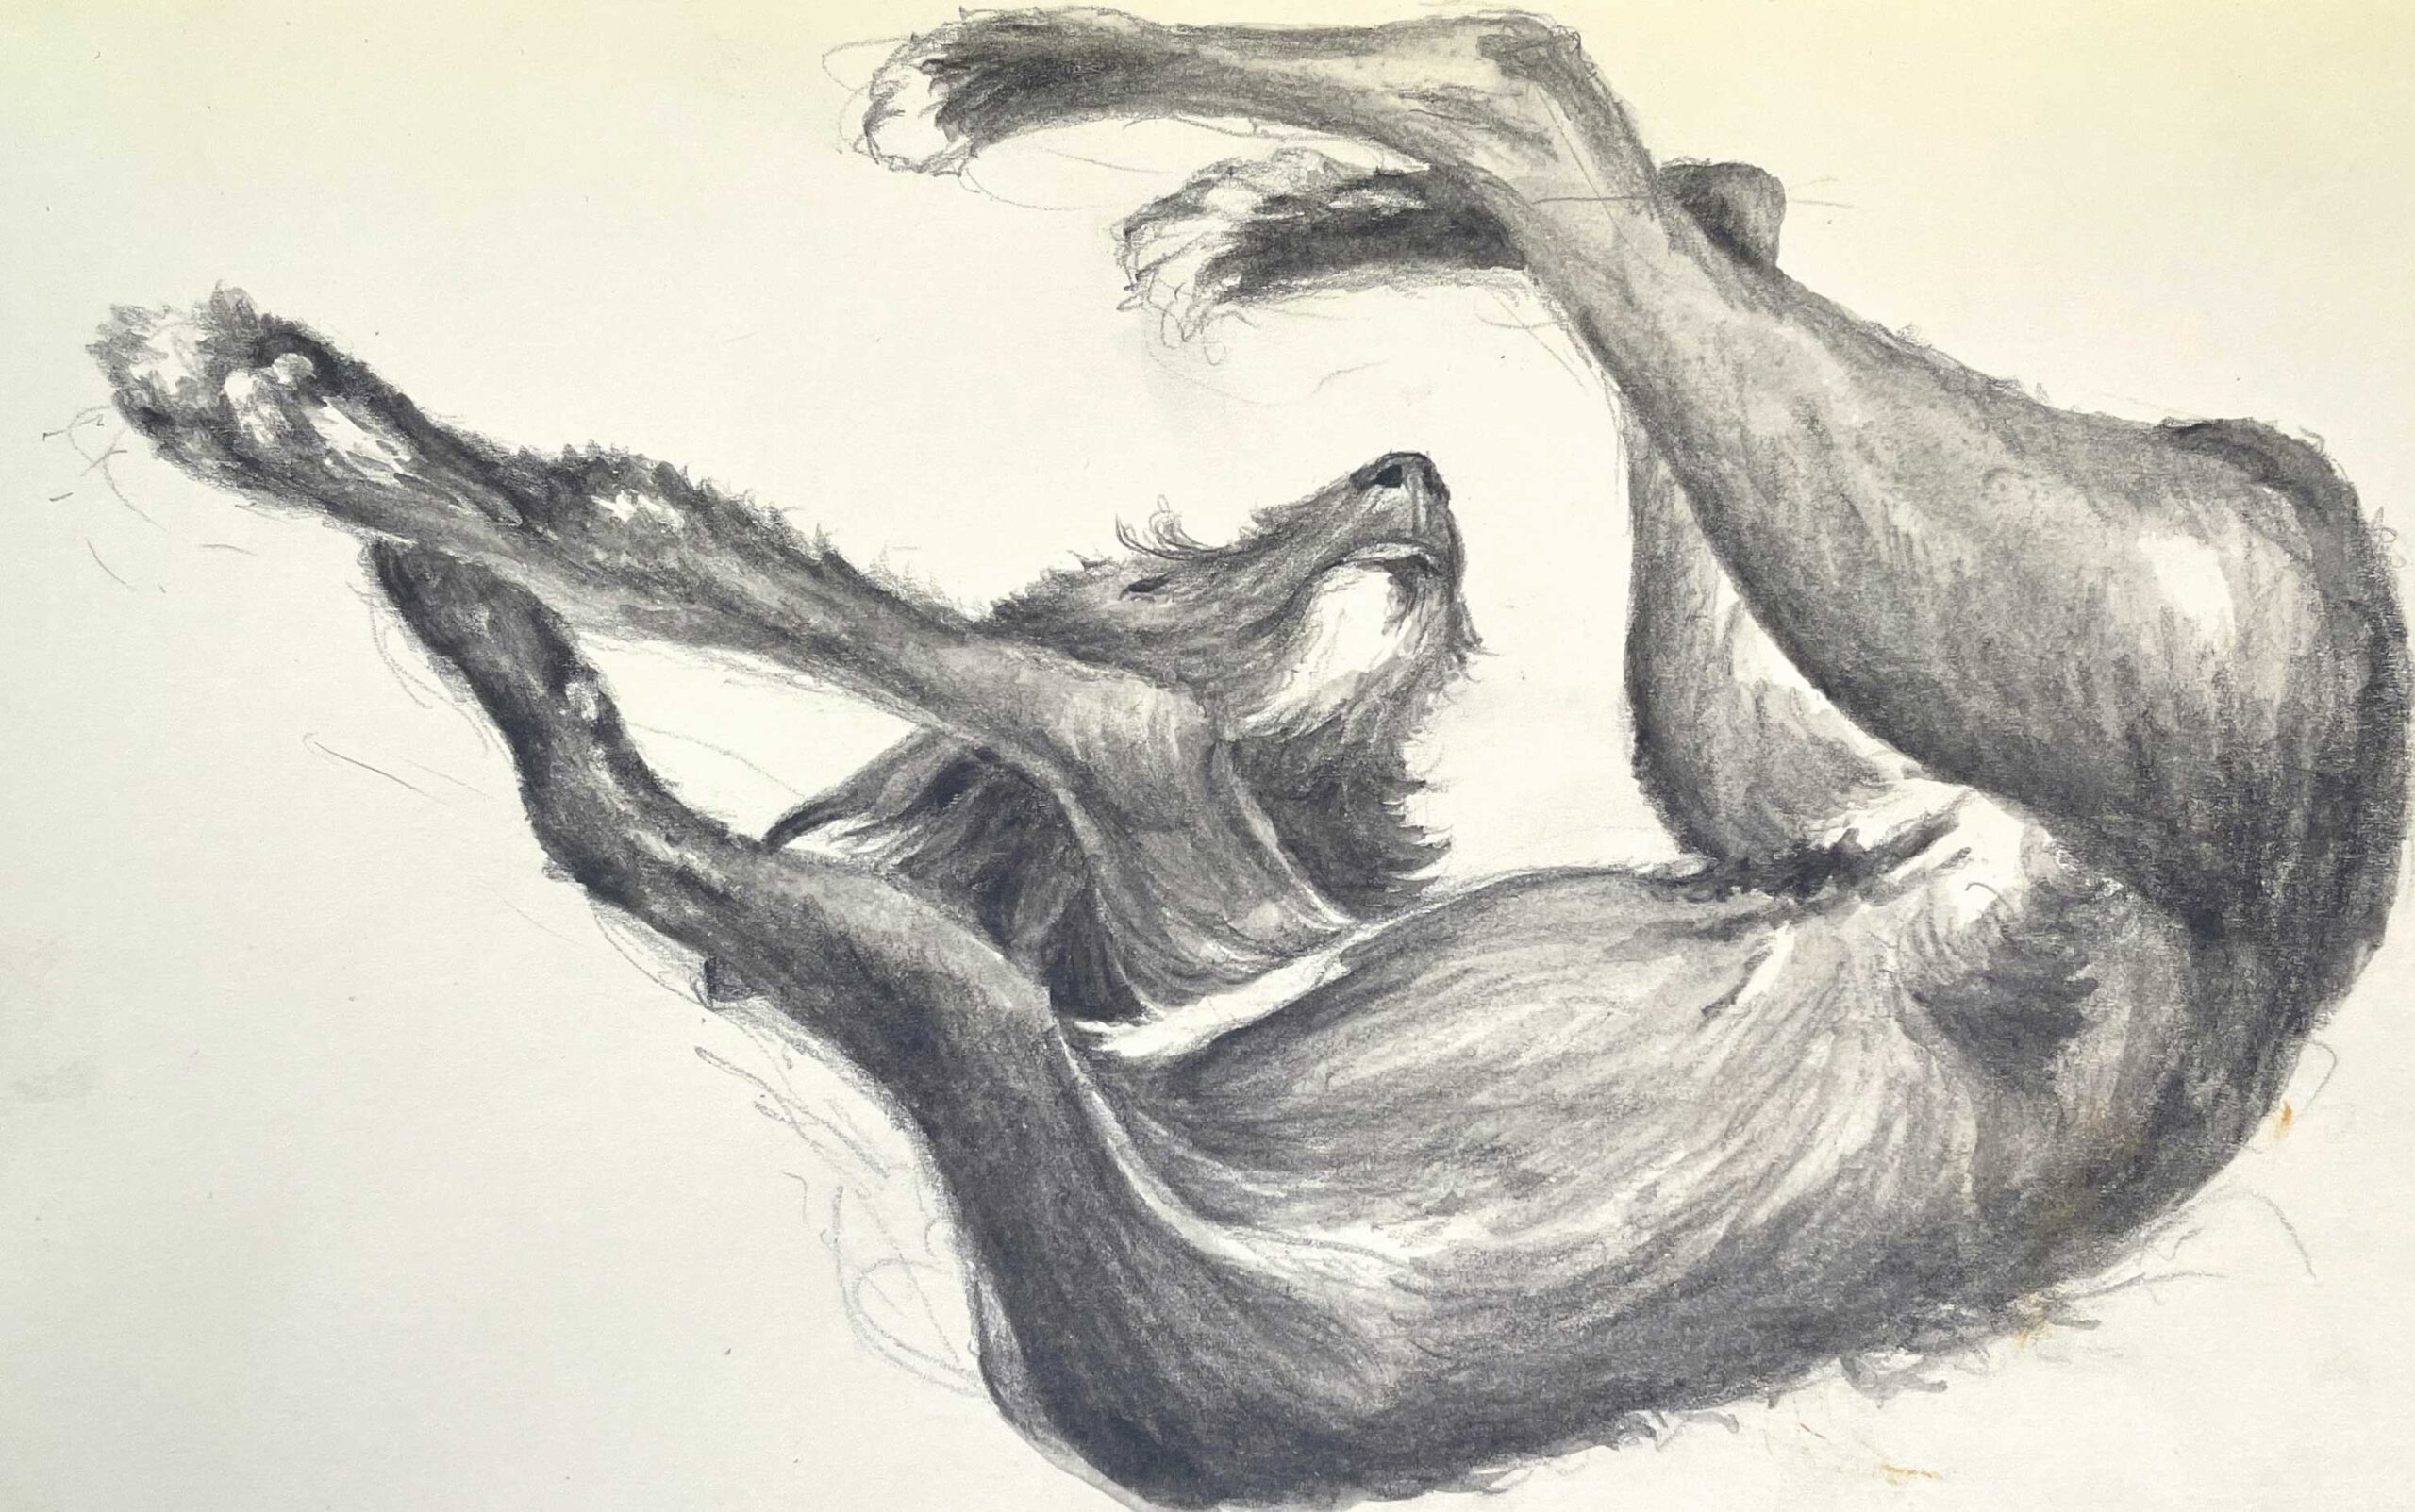 Realistic drawing of a dog - Susan Lynn (b. 1963), "Puppy Nap," 2016, water-soluble pencil on paper, 5 x 8 in., private collection 